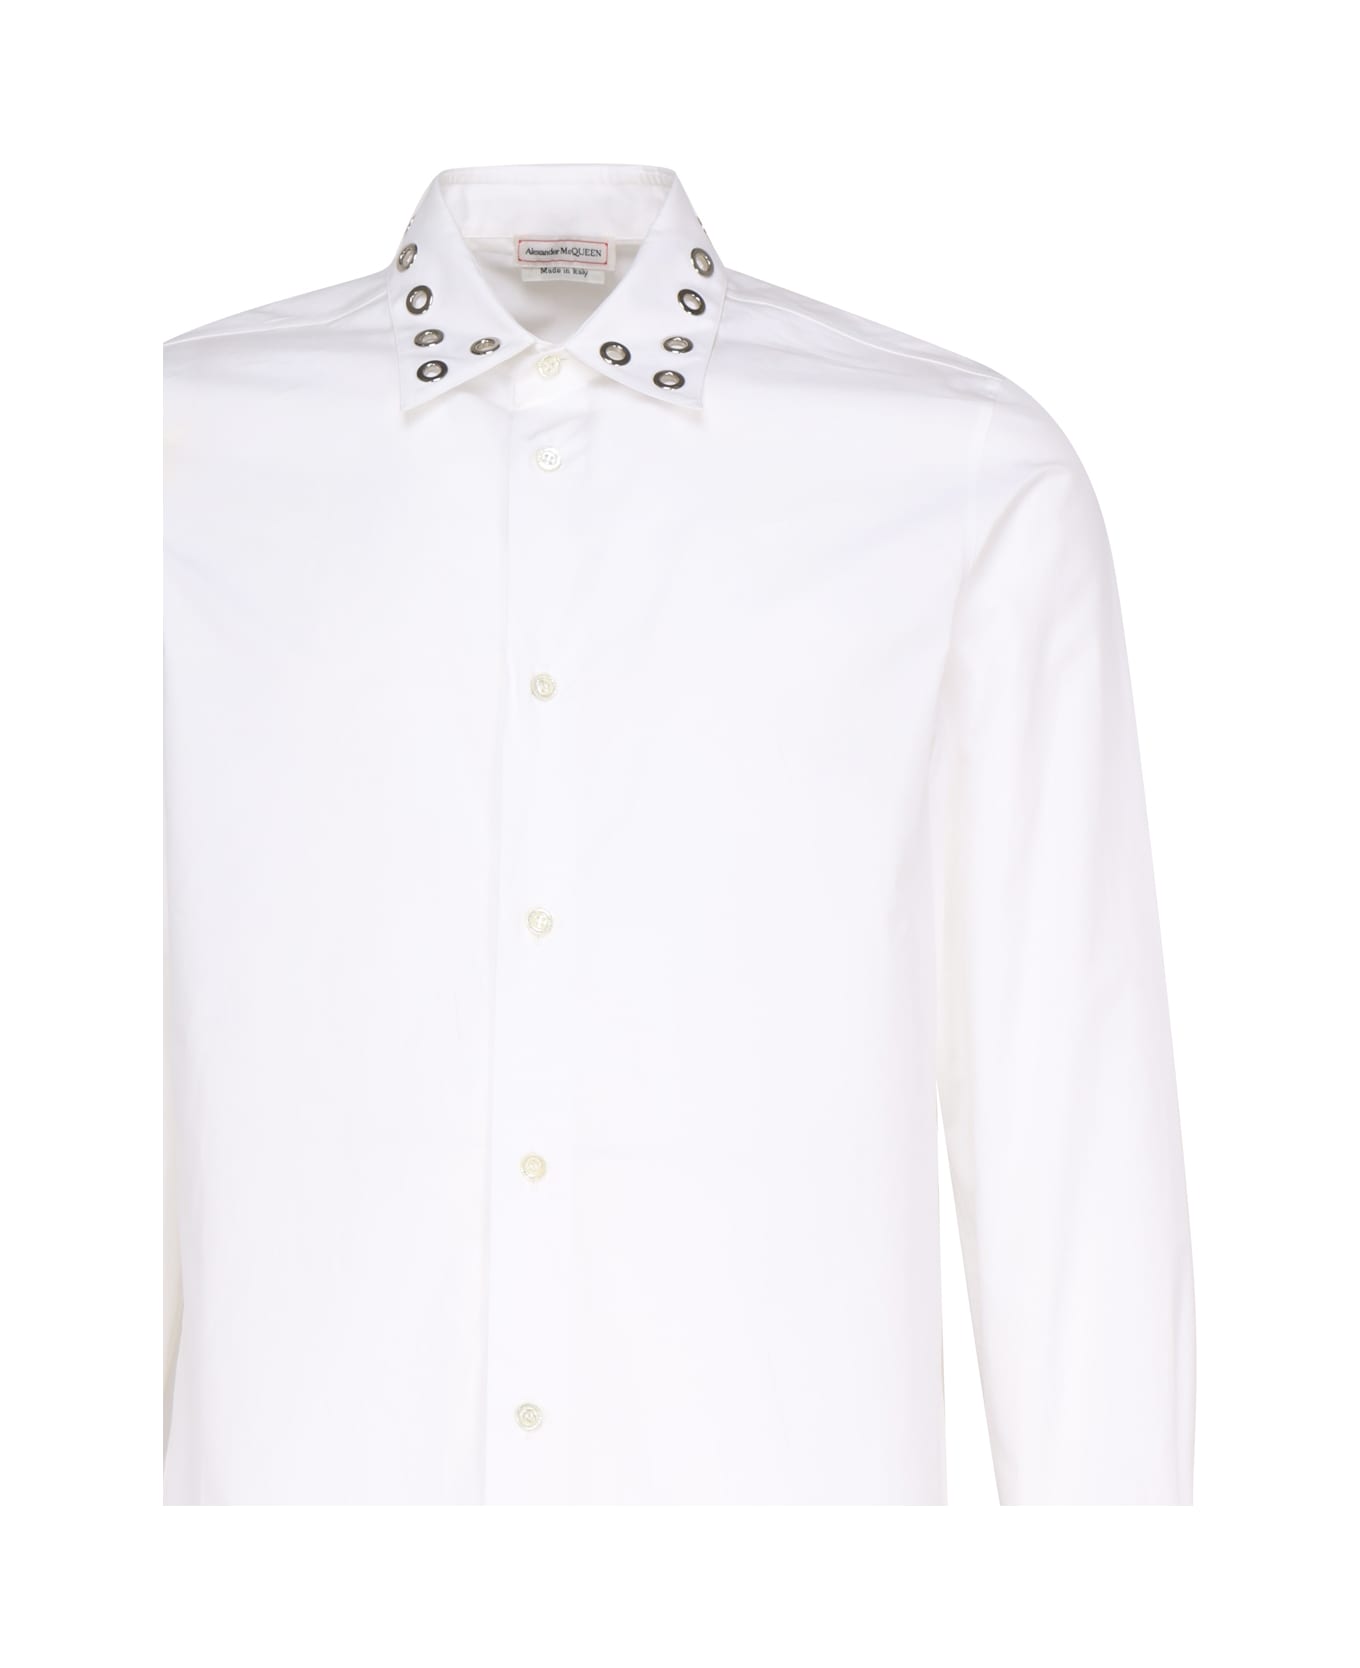 Alexander McQueen Shirt With Studded Collar And Cuffs - White